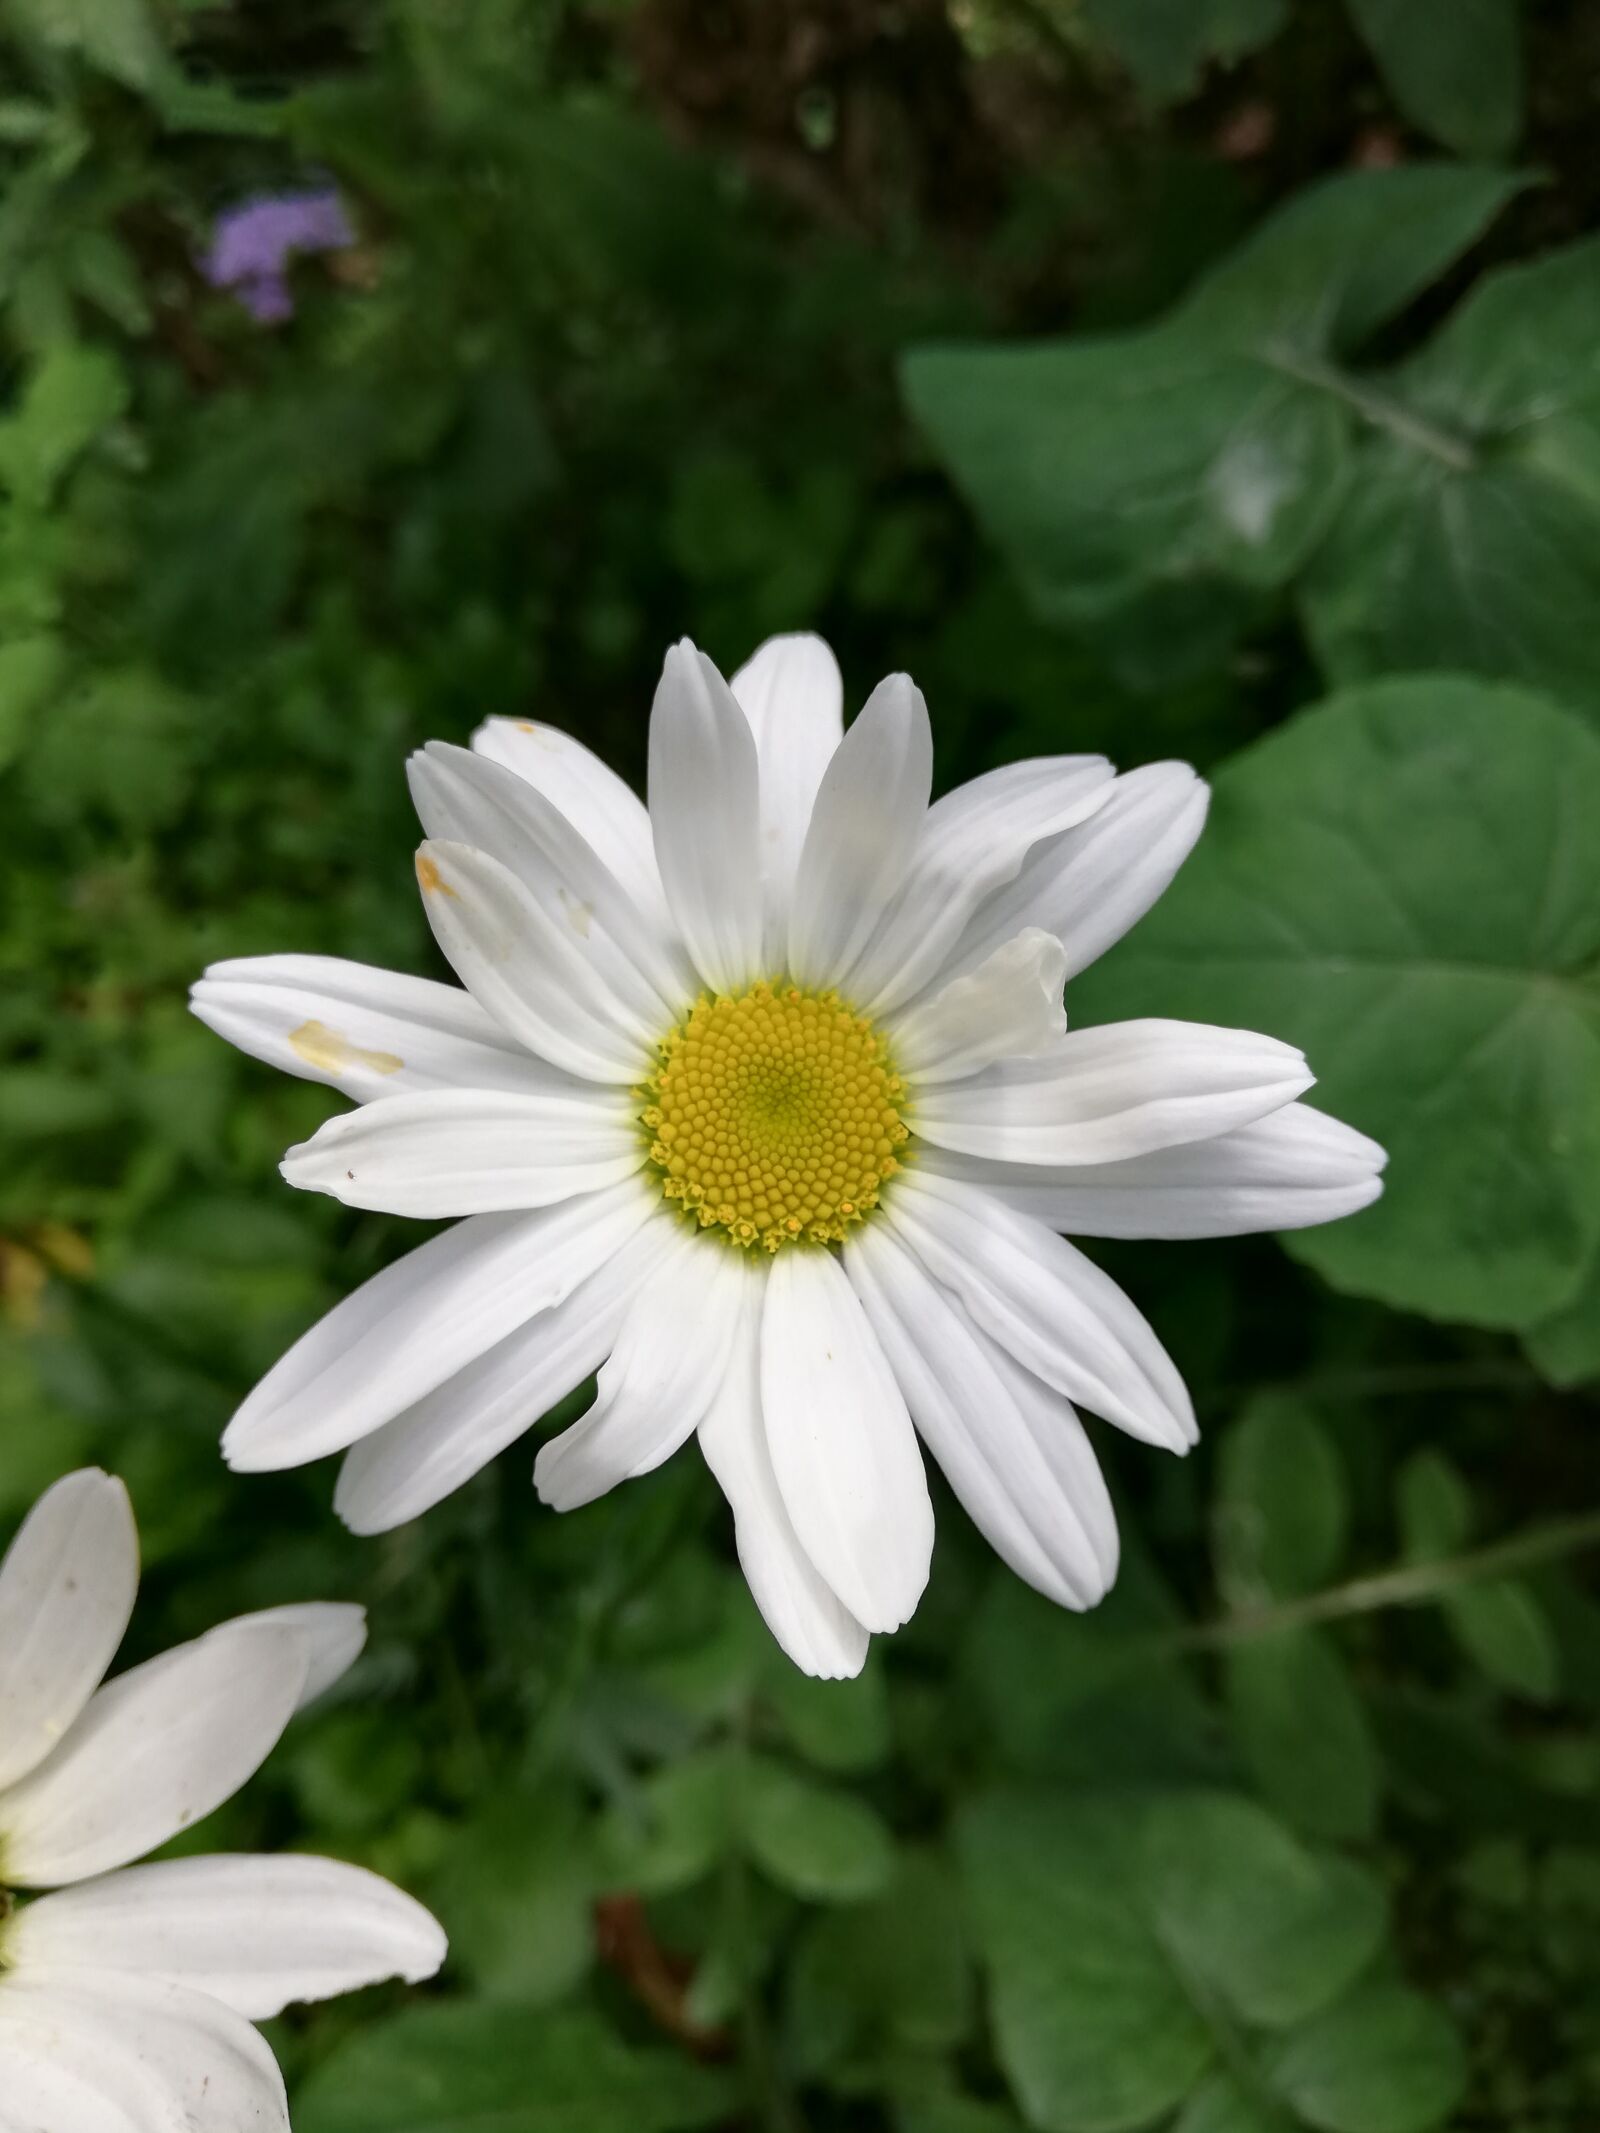 HUAWEI ANE-LX1 sample photo. Flower, daisy, day photography